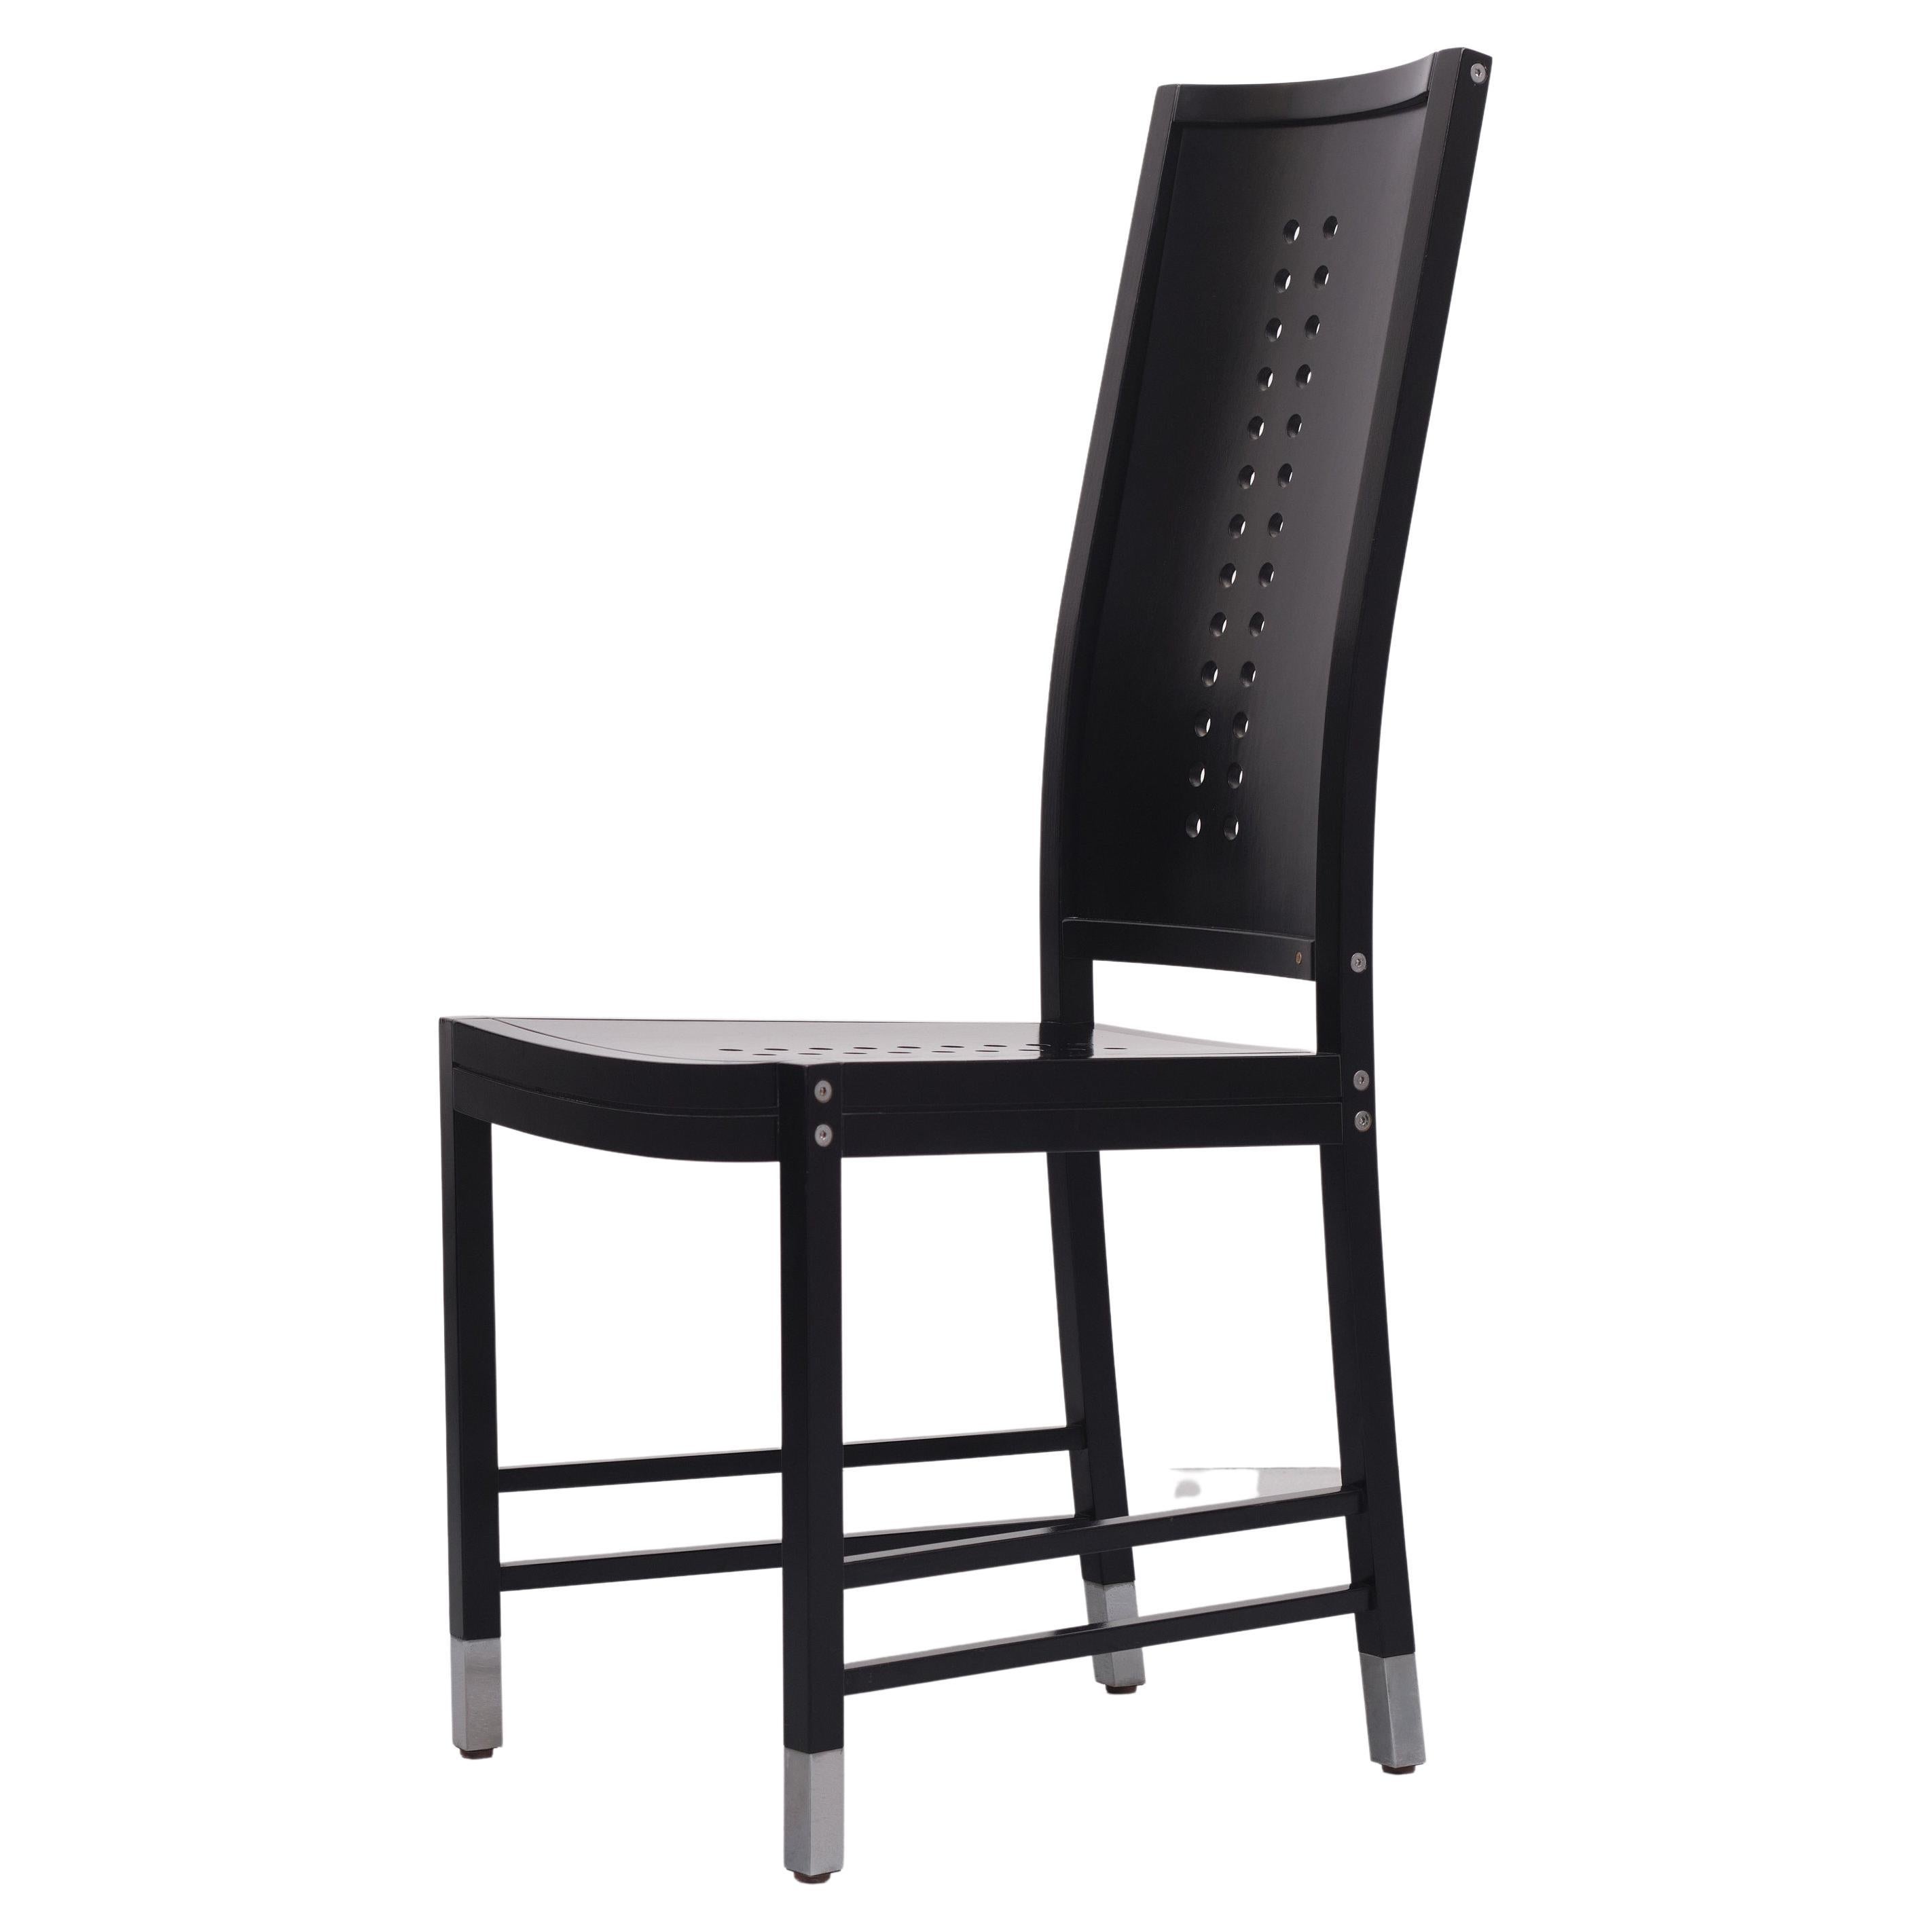 6 Black Ebonized dining chairs. References some great design minds of the 19th and 20th Centuries: Michael Thonet, Josef Hoffman and Otto Wagner, It was designed by Ernst W Beranek in Germany in the 1980s as an homage to the work of Michael Thonet –